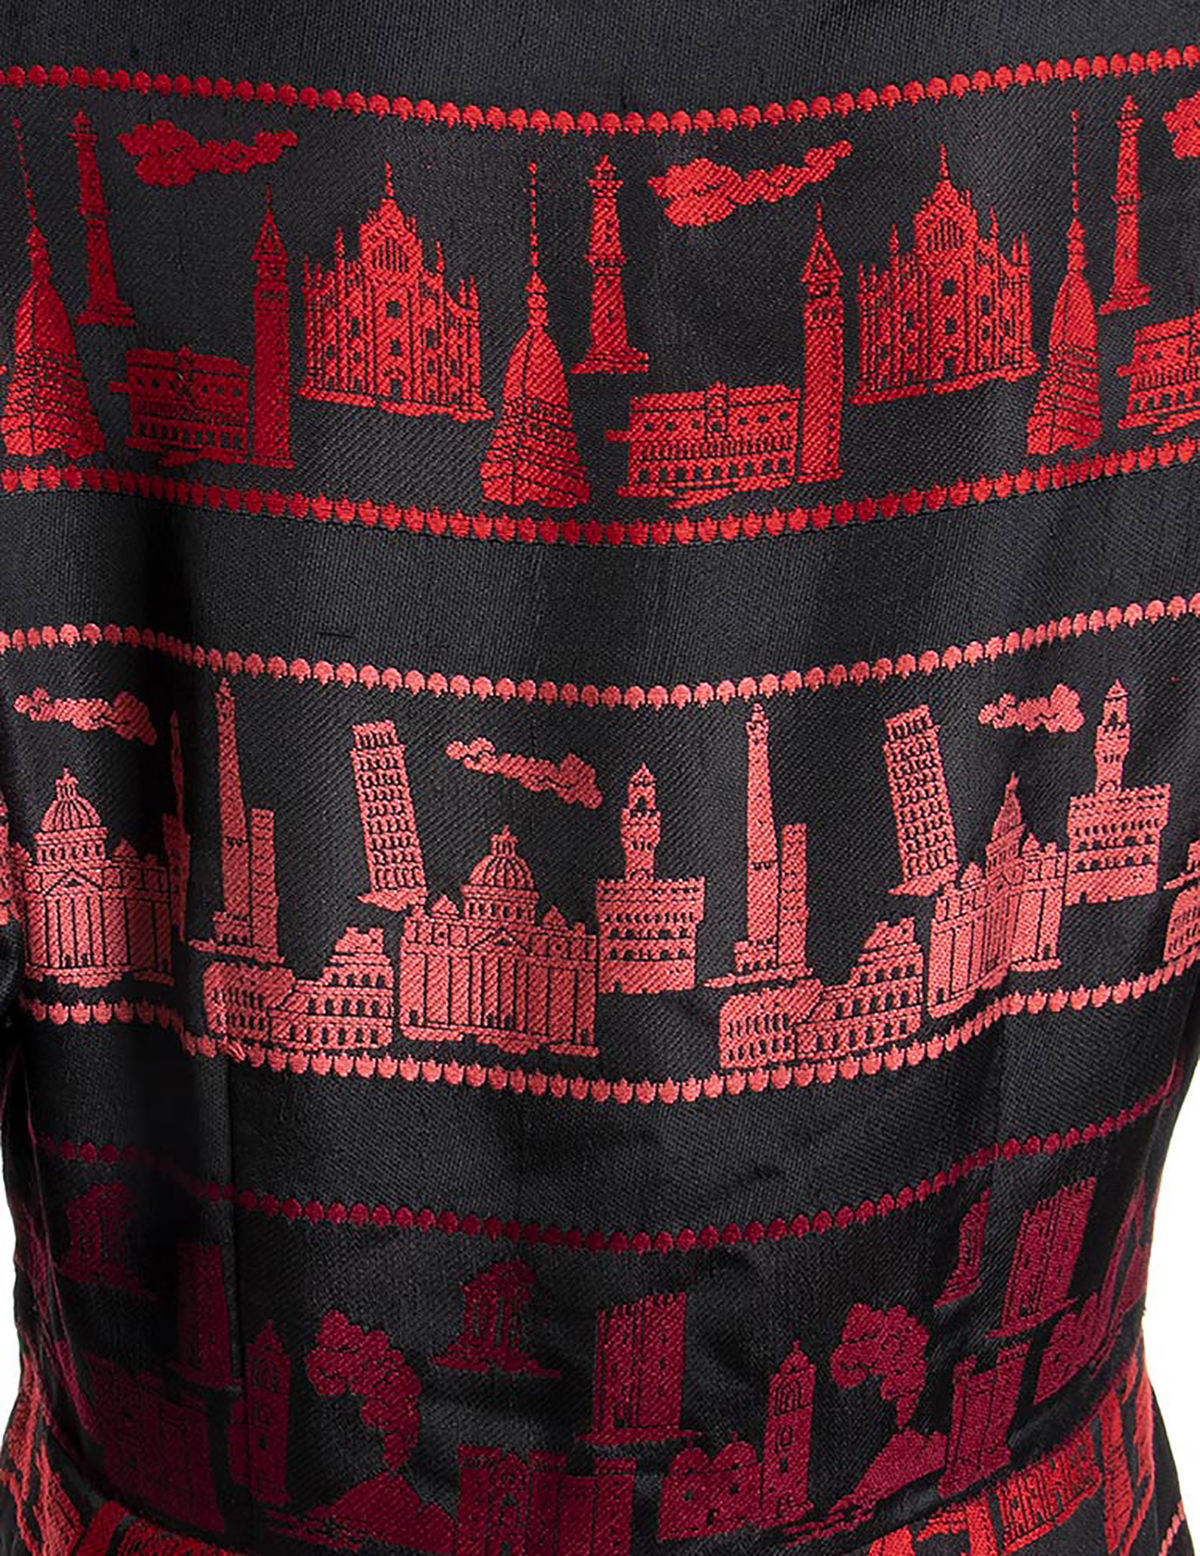 DRESS Late 60s A black background shades of red Italian monuments skyline pattern poly blend - Image 4 of 4